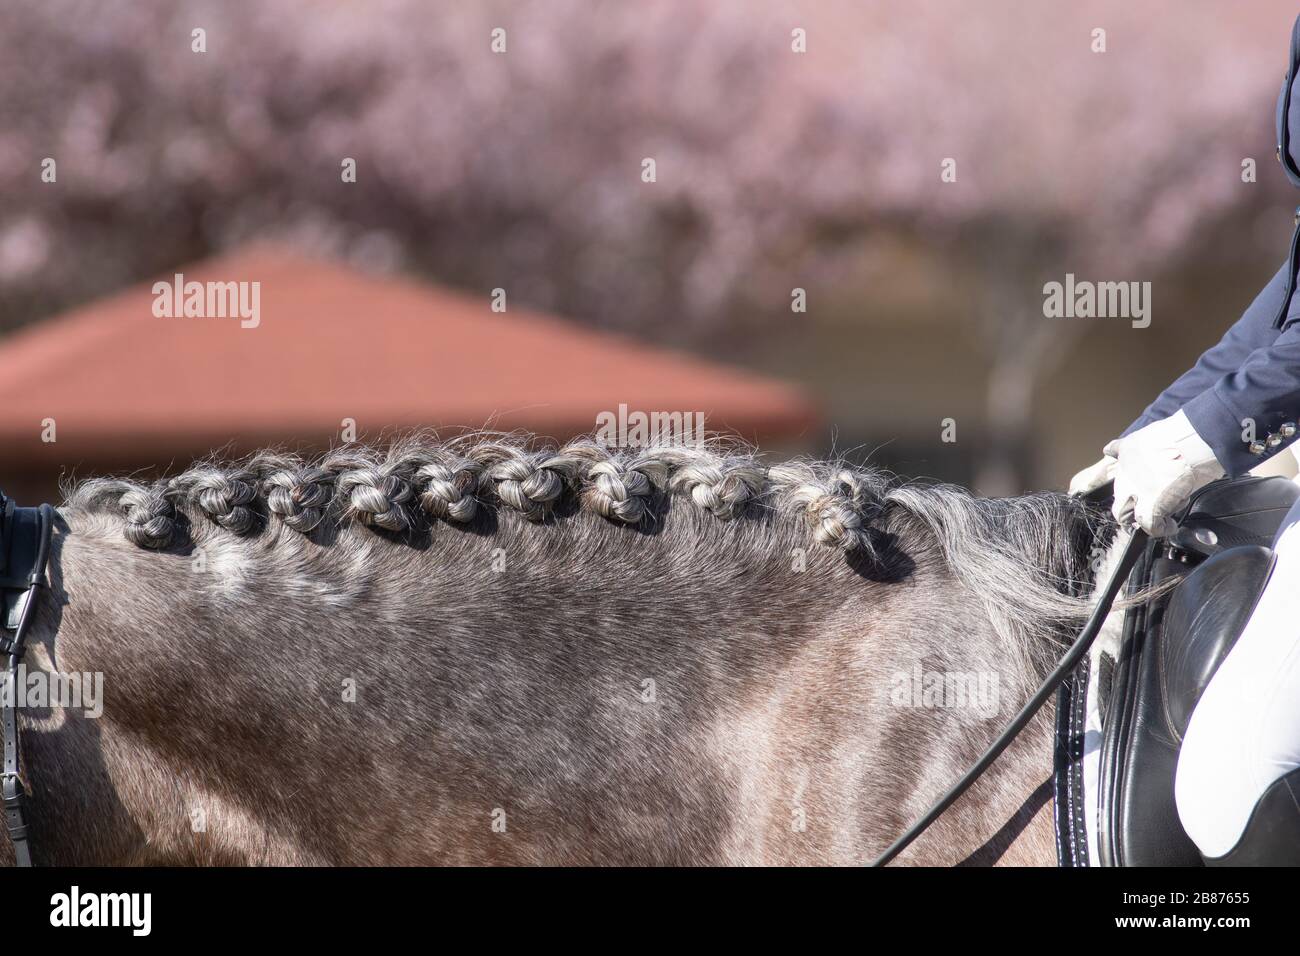 Detail of a braided neck with button braids in a dressage competition Stock Photo